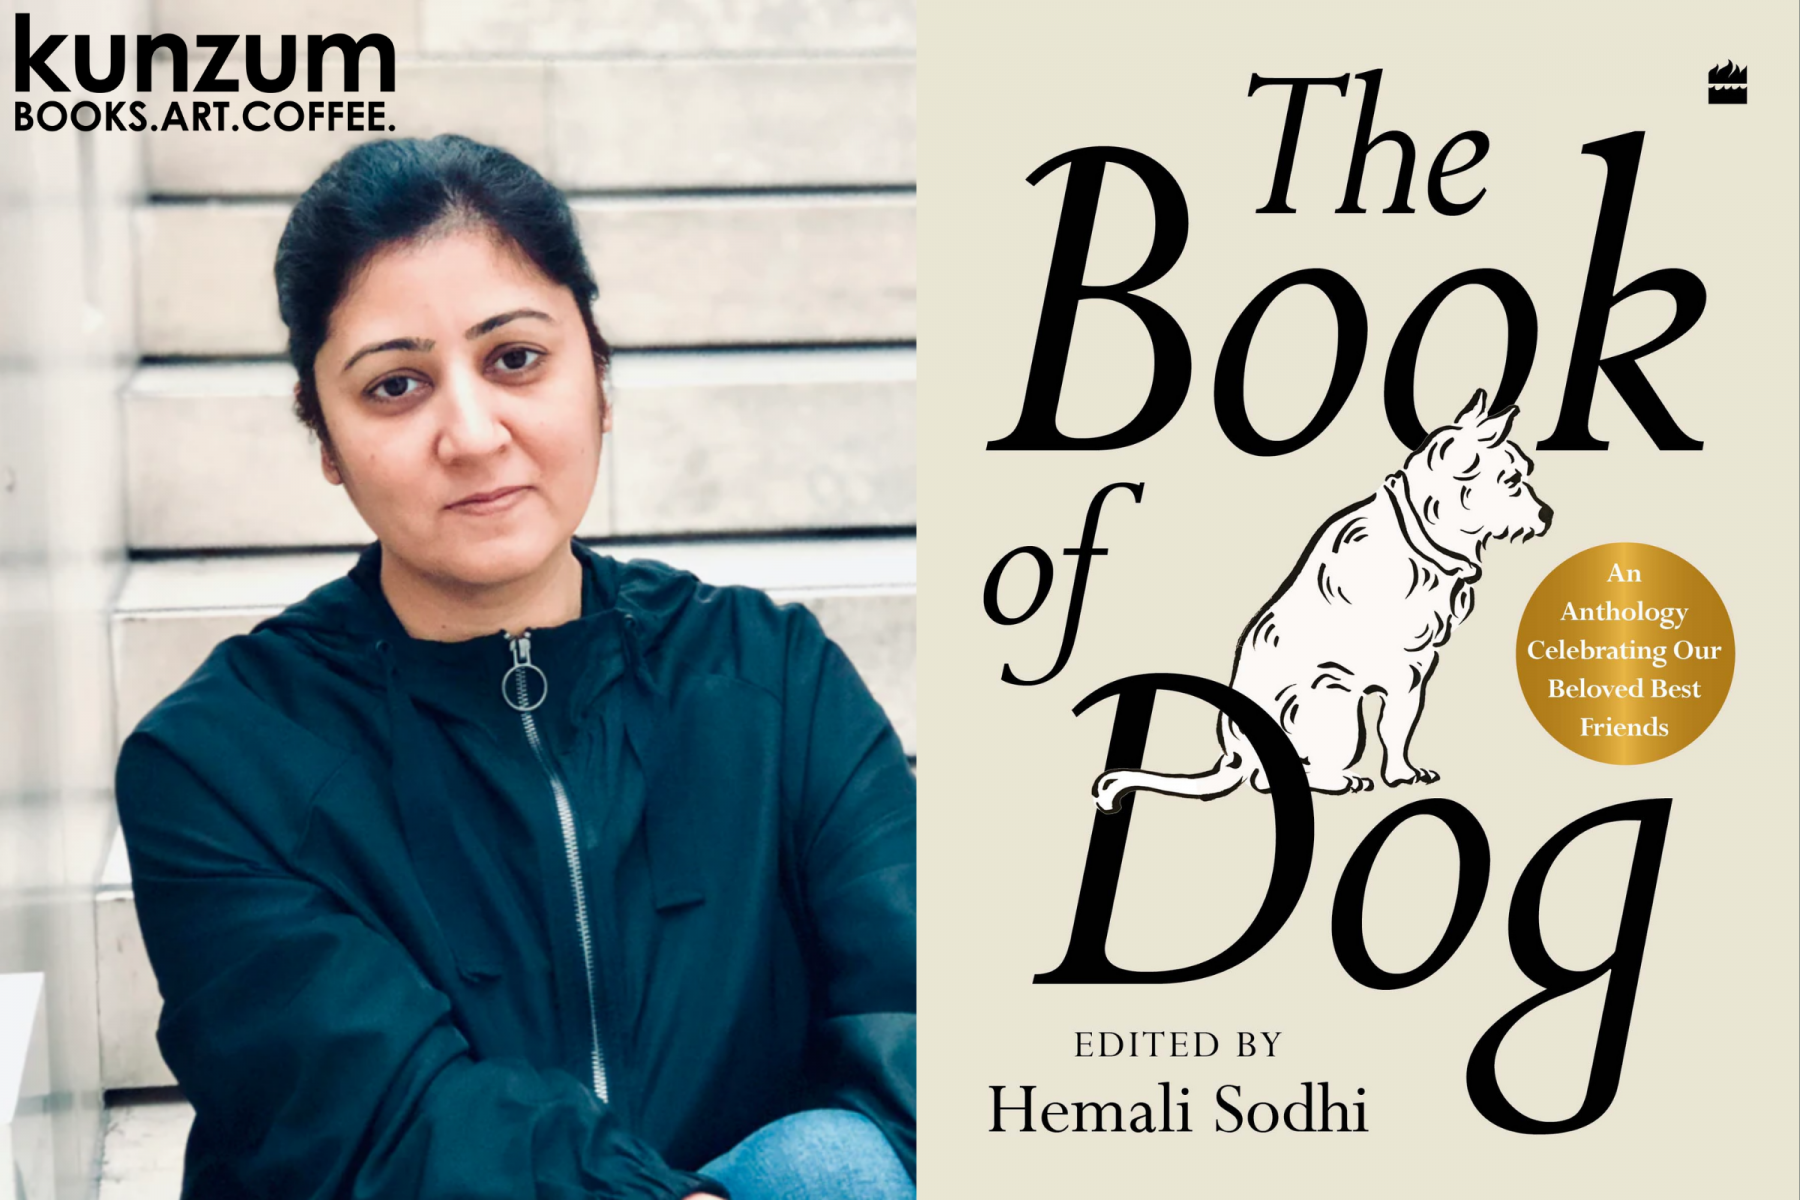 The Book of Dog: A Discussion With Hemali Sodhi, Kunzum – Gurgaon, April 23